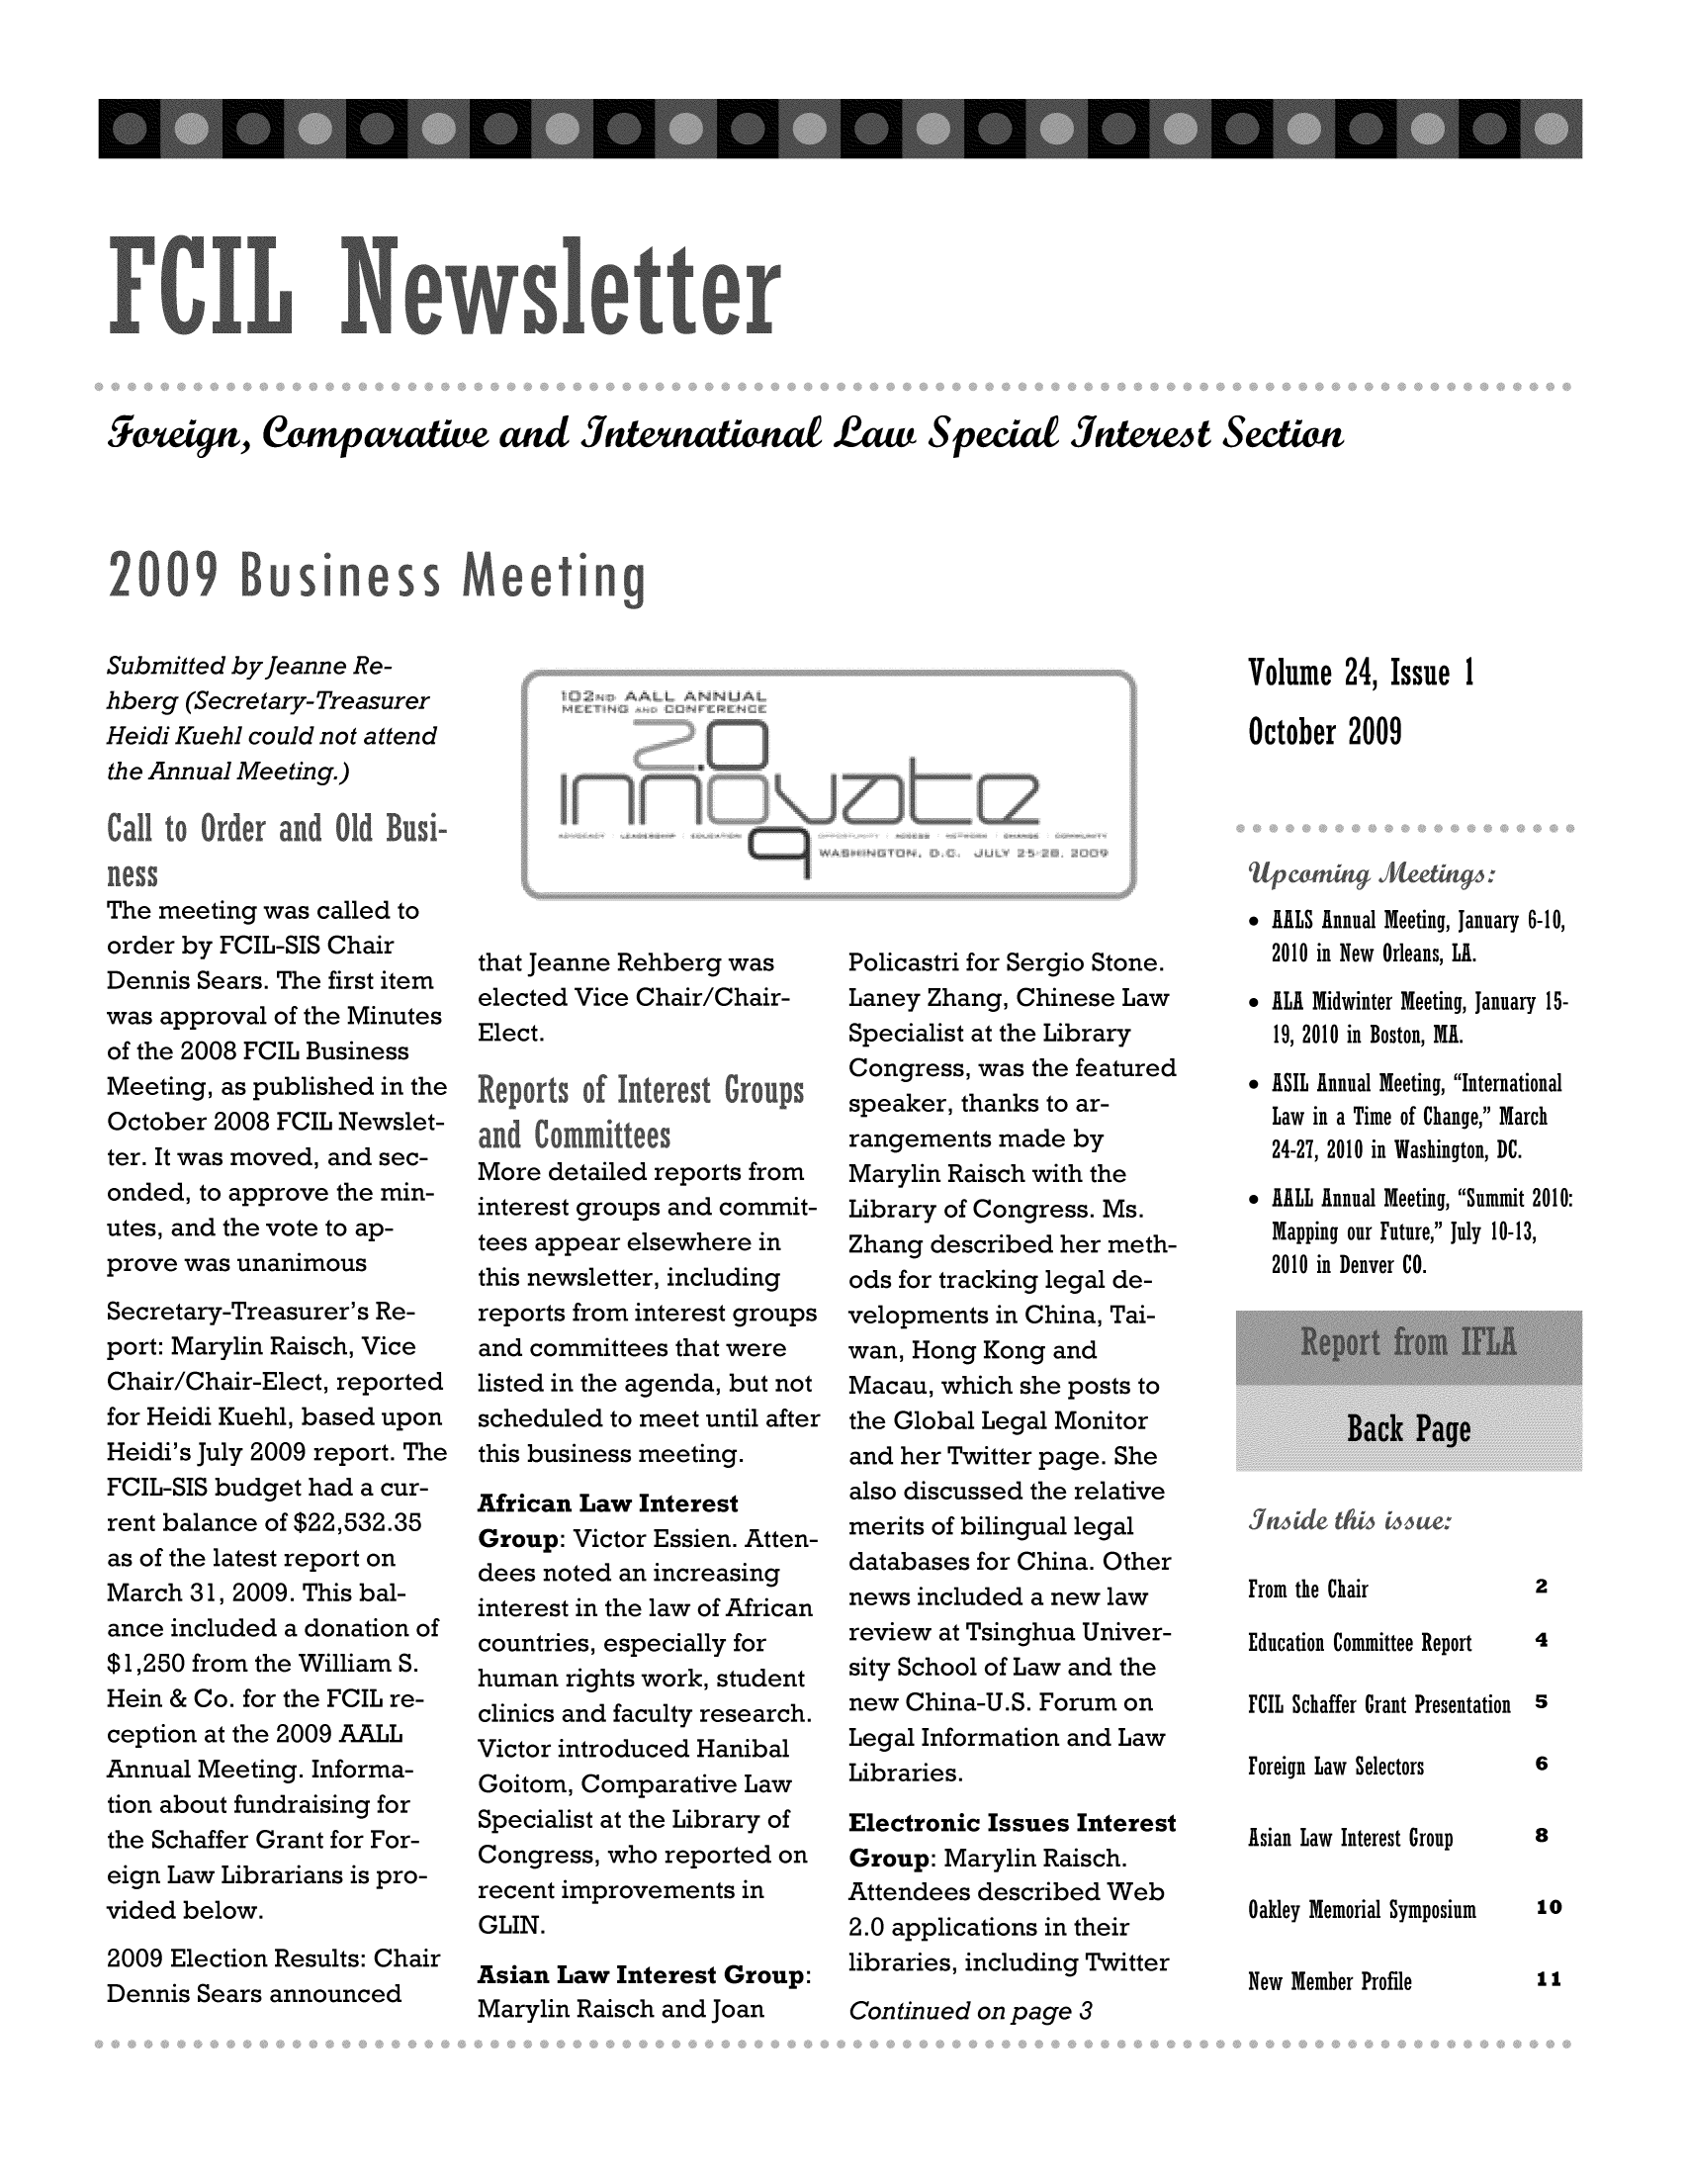 handle is hein.lbr/aafcnlt0024 and id is 1 raw text is: jeopatiW and JaticneauLSpeciae Jntt Sectu

Submitted by Jeanne Re-
hberg (Secretary- Treasurer
Heidi Kuehl could not attend
the Annual Meeting.)

Volume 24, Issue 1
October 2009

The meeting was called to
order by FCIL-SIS Chair
Dennis Sears. The first item
was approval of the Minutes
of the 2008 FCIL Business
Meeting, as published in the
October 2008 FCIL Newslet-
ter. It was moved, and sec-
onded, to approve the min-
utes, and the vote to ap-
prove was unanimous
Secretary-Treasurer's Re-
port: Marylin Raisch, Vice
Chair/Chair-Elect, reported
for Heidi Kuehl, based upon
Heidi's July 2009 report. The
FCIL-SIS budget had a cur-
rent balance of $22,532.35
as of the latest report on
March 31, 2009. This bal-
ance included a donation of
$1,250 from the William S.
Hein & Co. for the FCIL re-
ception at the 2009 AALL
Annual Meeting. Informa-
tion about fundraising for
the Schaffer Grant for For-
eign Law Librarians is pro-
vided below.
2009 Election Results: Chair
Dennis Sears announced

that Jeanne Rehberg was
elected Vice Chair/Chair-
Elect.
and  omite
More detailed reports from
interest groups and commit-
tees appear elsewhere in
this newsletter, including
reports from interest groups
and committees that were
listed in the agenda, but not
scheduled to meet until after
this business meeting.
African Law Interest
Group: Victor Essien. Atten-
dees noted an increasing
interest in the law of African
countries, especially for
human rights work, student
clinics and faculty research.
Victor introduced Hanibal
Goitom, Comparative Law
Specialist at the Library of
Congress, who reported on
recent improvements in
GLIN.
Asian Law Interest Group:
Marylin Raisch and Joan

Policastri for Sergio Stone.
Laney Zhang, Chinese Law
Specialist at the Library
Congress, was the featured
speaker, thanks to ar-
rangements made by
Marylin Raisch with the
Library of Congress. Ms.
Zhang described her meth-
ods for tracking legal de-
velopments in China, Tai-
wan, Hong Kong and
Macau, which she posts to
the Global Legal Monitor
and her Twitter page. She
also discussed the relative
merits of bilingual legal
databases for China. Other
news included a new law
review at Tsinghua Univer-
sity School of Law and the
new China-U.S. Forum on
Legal Information and Law
Libraries.
Electronic Issues Interest
Group: Marylin Raisch.
Attendees described Web
2.0 applications in their
libraries, including Twitter
Continued on page 3

 AALS Annual Meeting, January 6-10,
2010 in New Orleans, LA.
 ALA Midwinter Meeting, January 15-
19, 2010 in Boston, MA.
 ASIL Annual Meeting, International
Law in a Time of Change, March
24-27, 2010 in Washington, DC.
 AALL Annual Meeting, Summit 2010:
Mapping our Future, July 10-13,
2010 in Denver CO.

From the Chair
Education Committee Report

FCIL Schaffer Grant Presentation s

Foreign Law Selectors
Asian Law Interest Group
Oakley Memorial Symposium
New Member Profile

6
8
10
11


